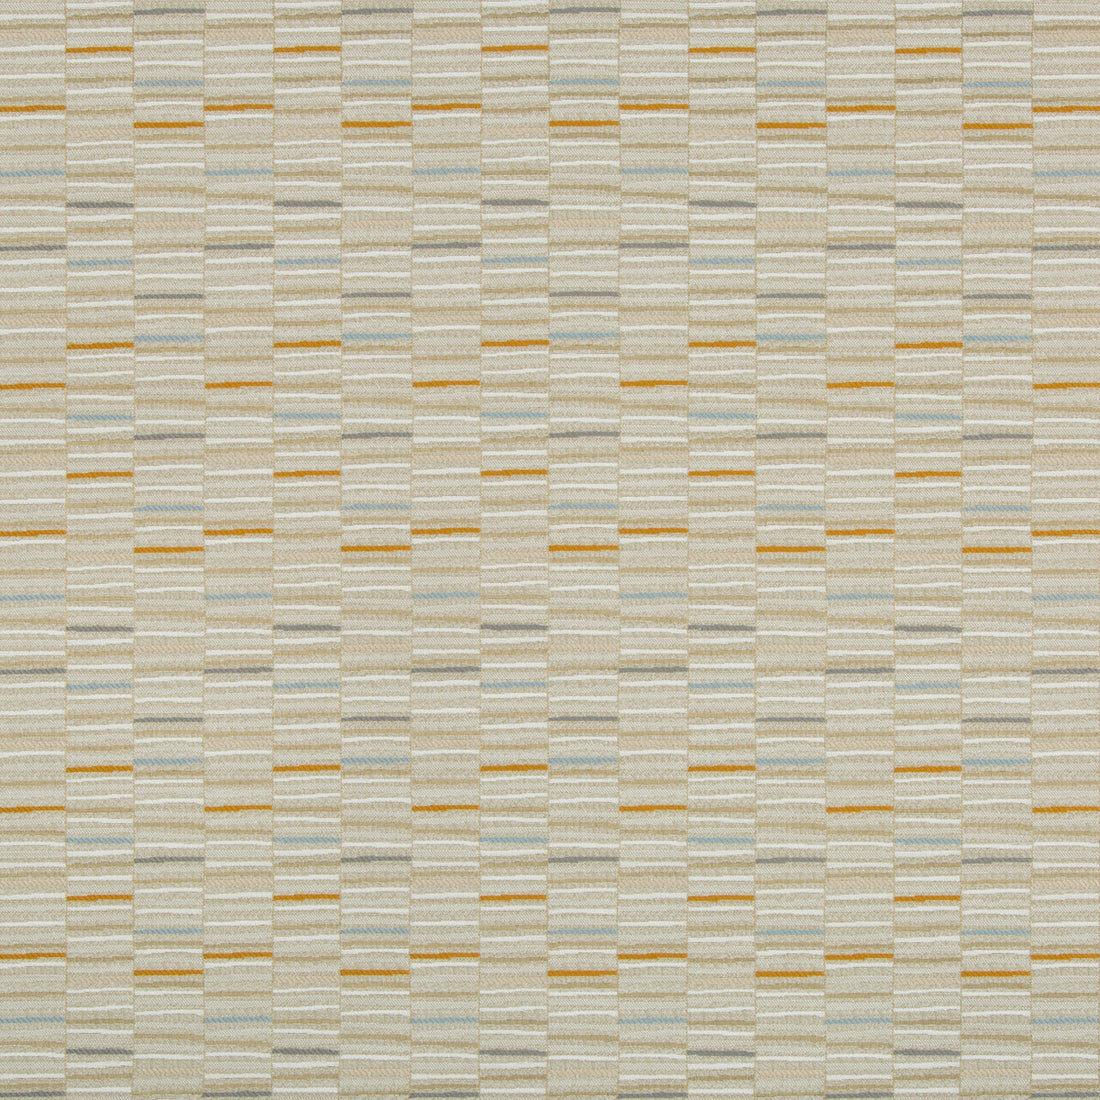 Lined Up fabric in skylight color - pattern 35085.11.0 - by Kravet Contract in the Gis Crypton collection